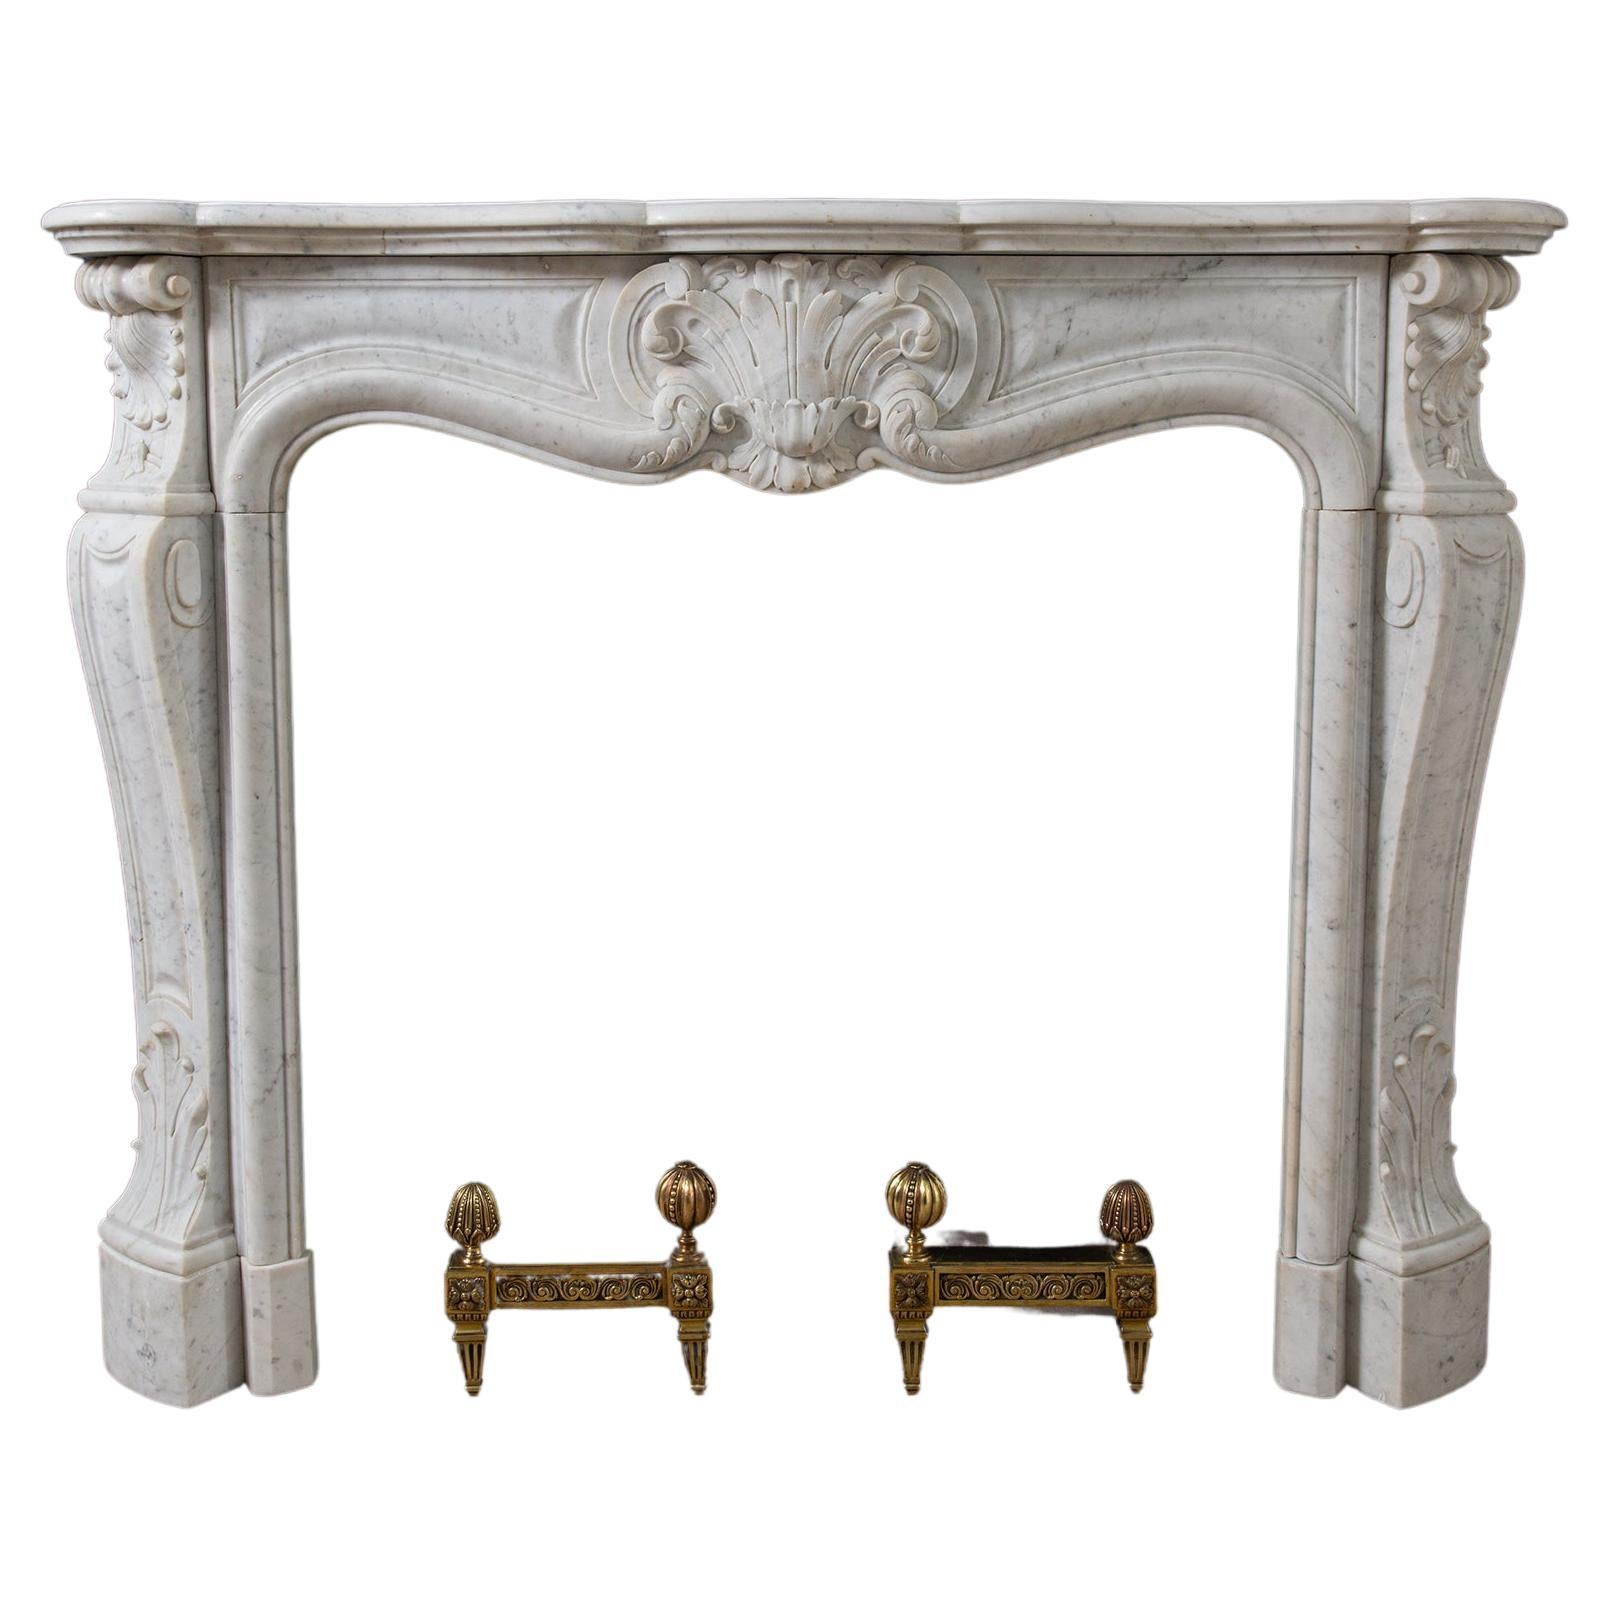 Beautiful French Antique Fireplace in Louis XV Style, Made of Carrara Marble